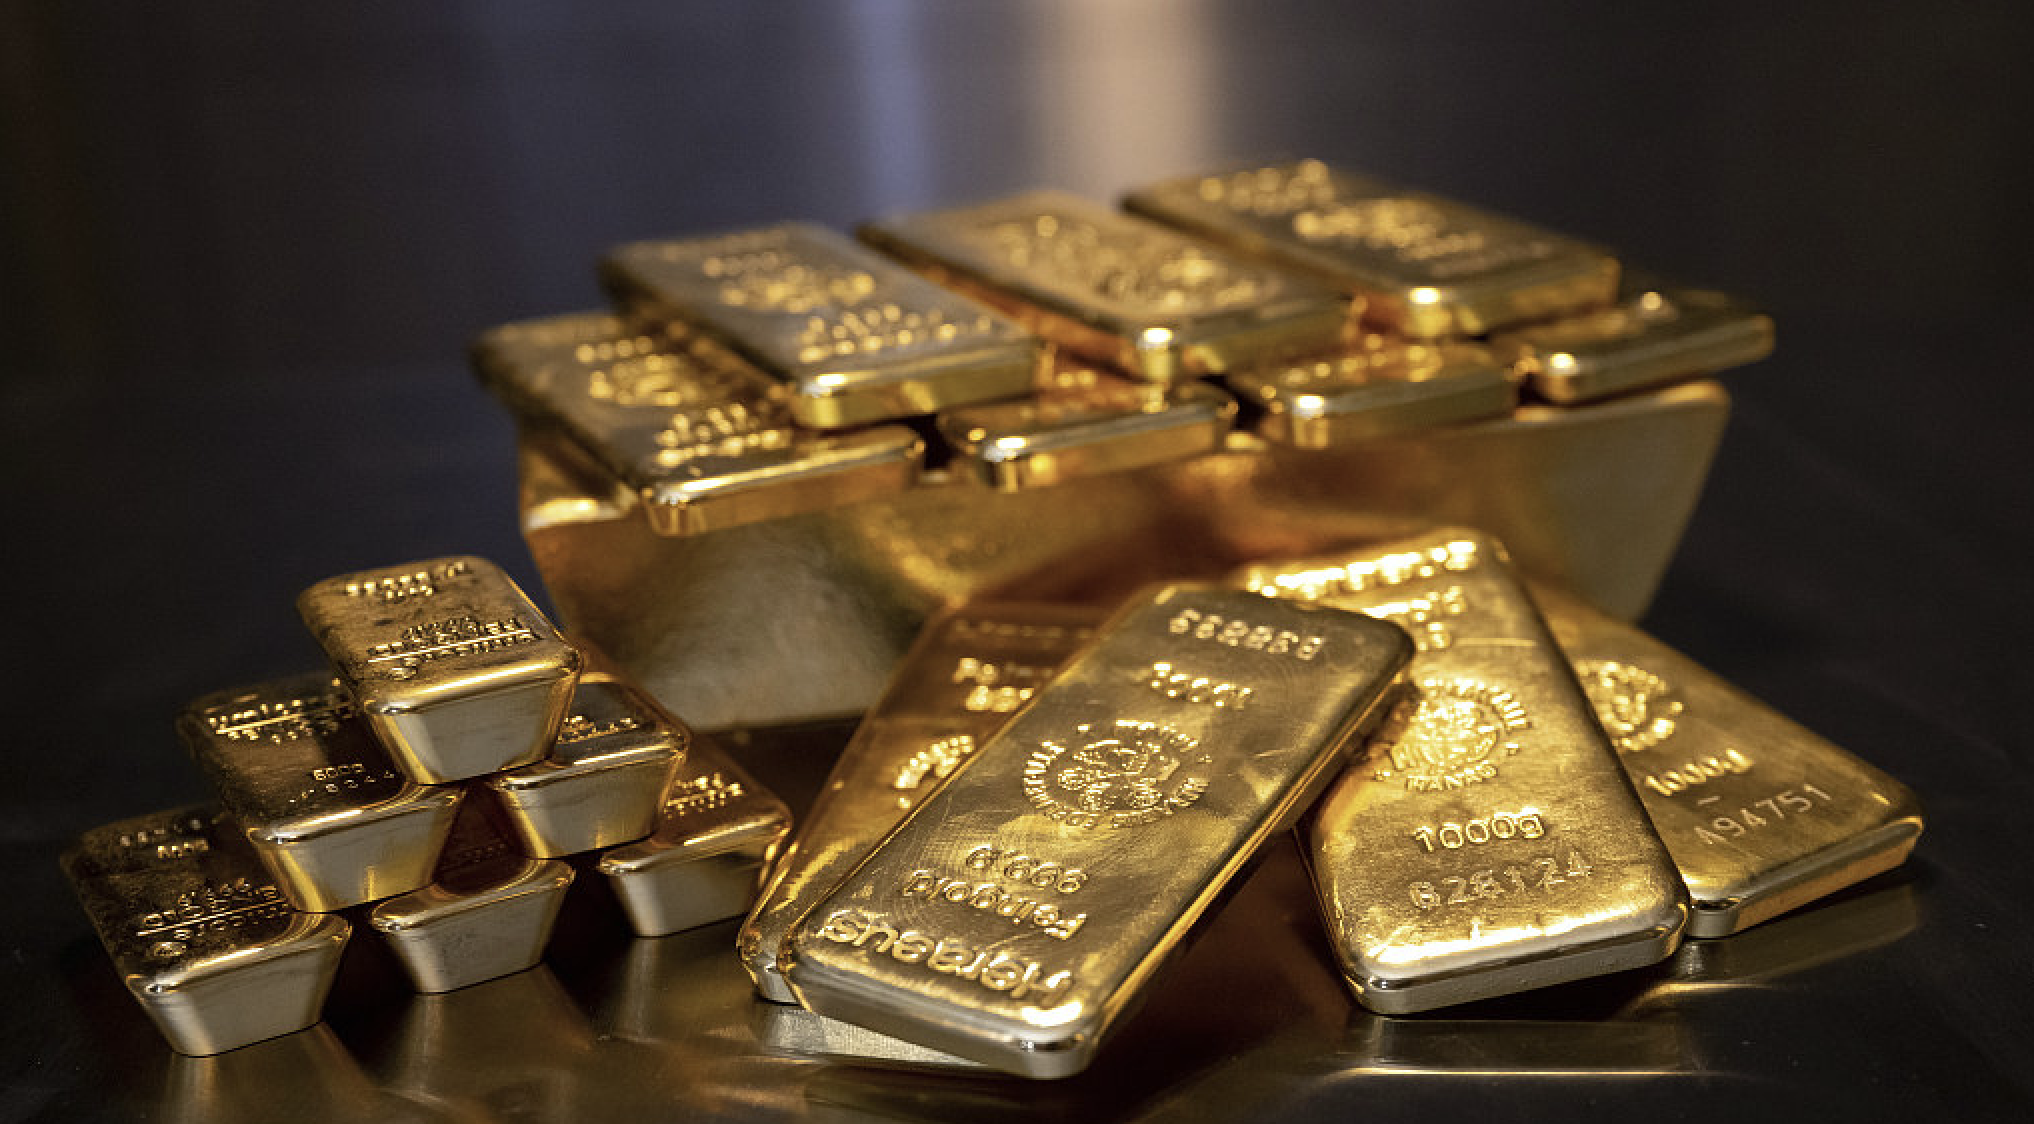 According to an expert, there is a current unprecedented hike of gold prices due to the high demand of Egyptians who consider it a safe investment. /CFP